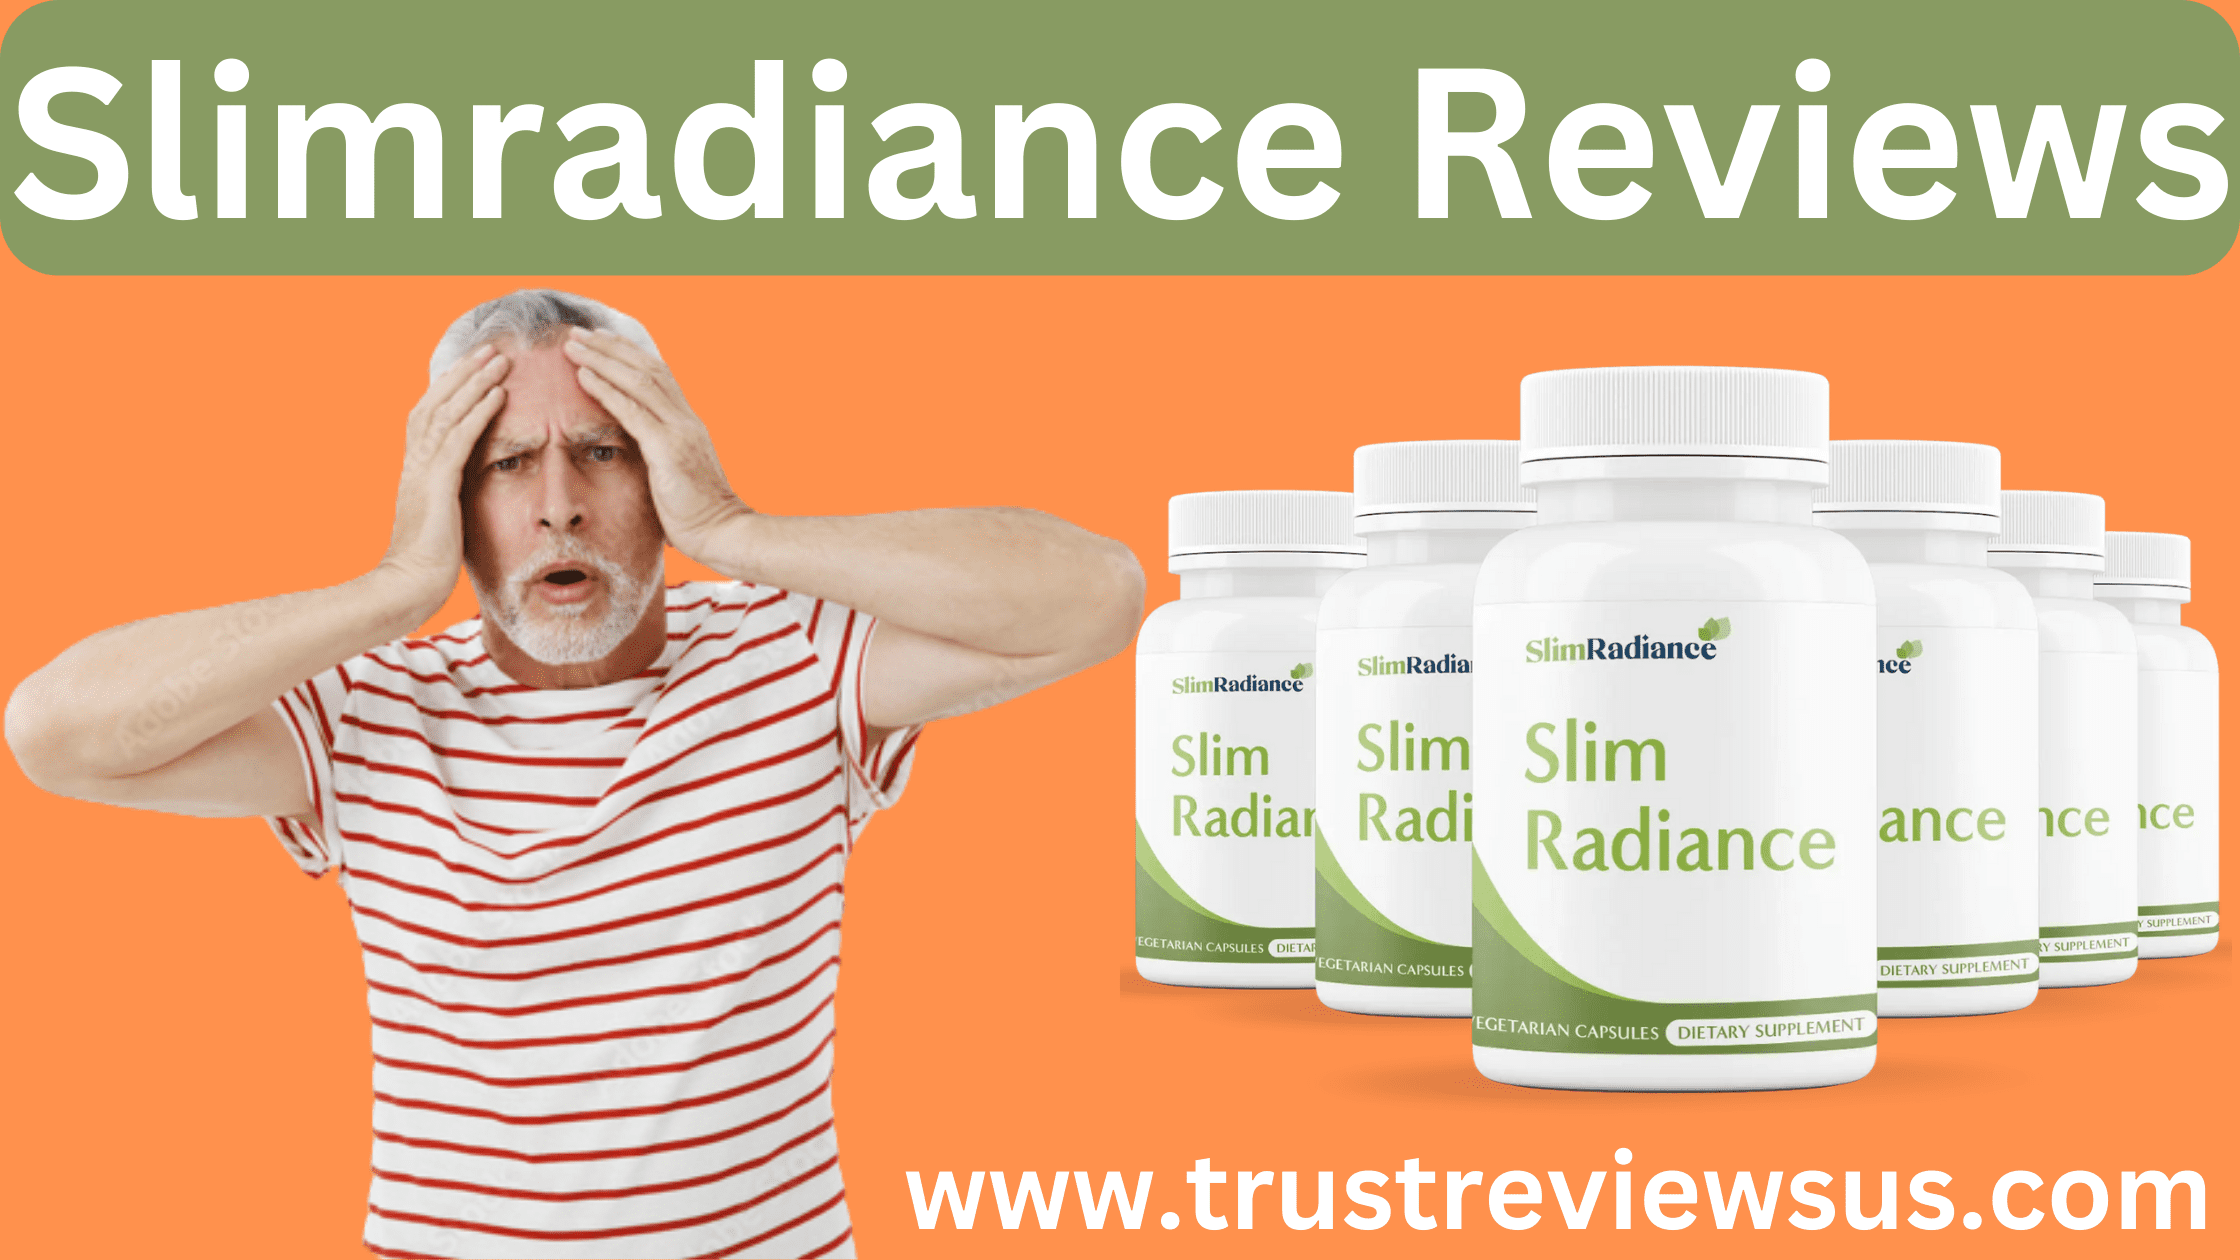 Slimradiance Reviews